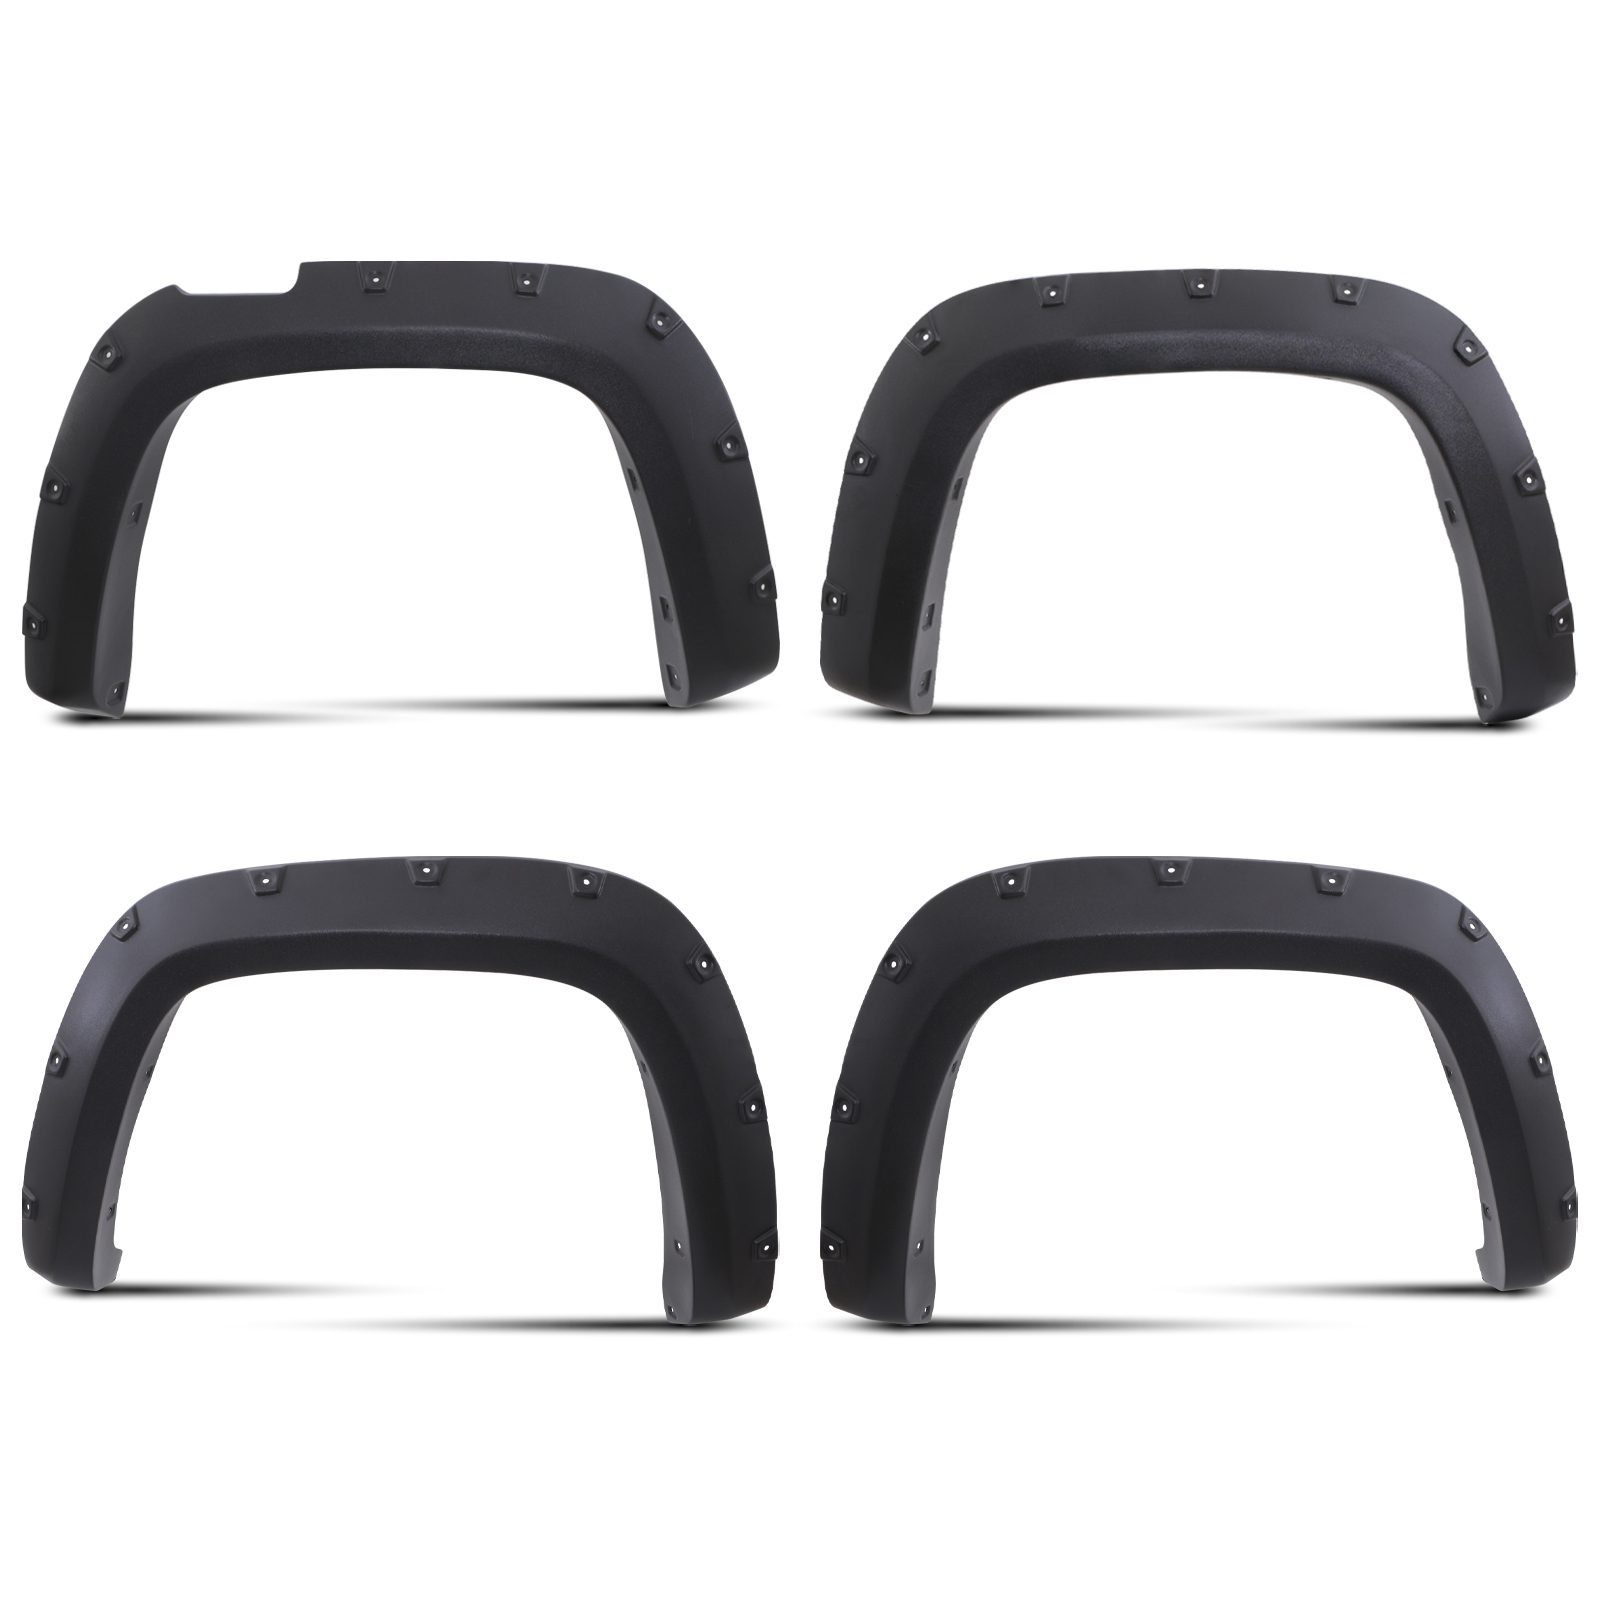 Off Road A Style Wide arches set/ Fender flare extensions For VW